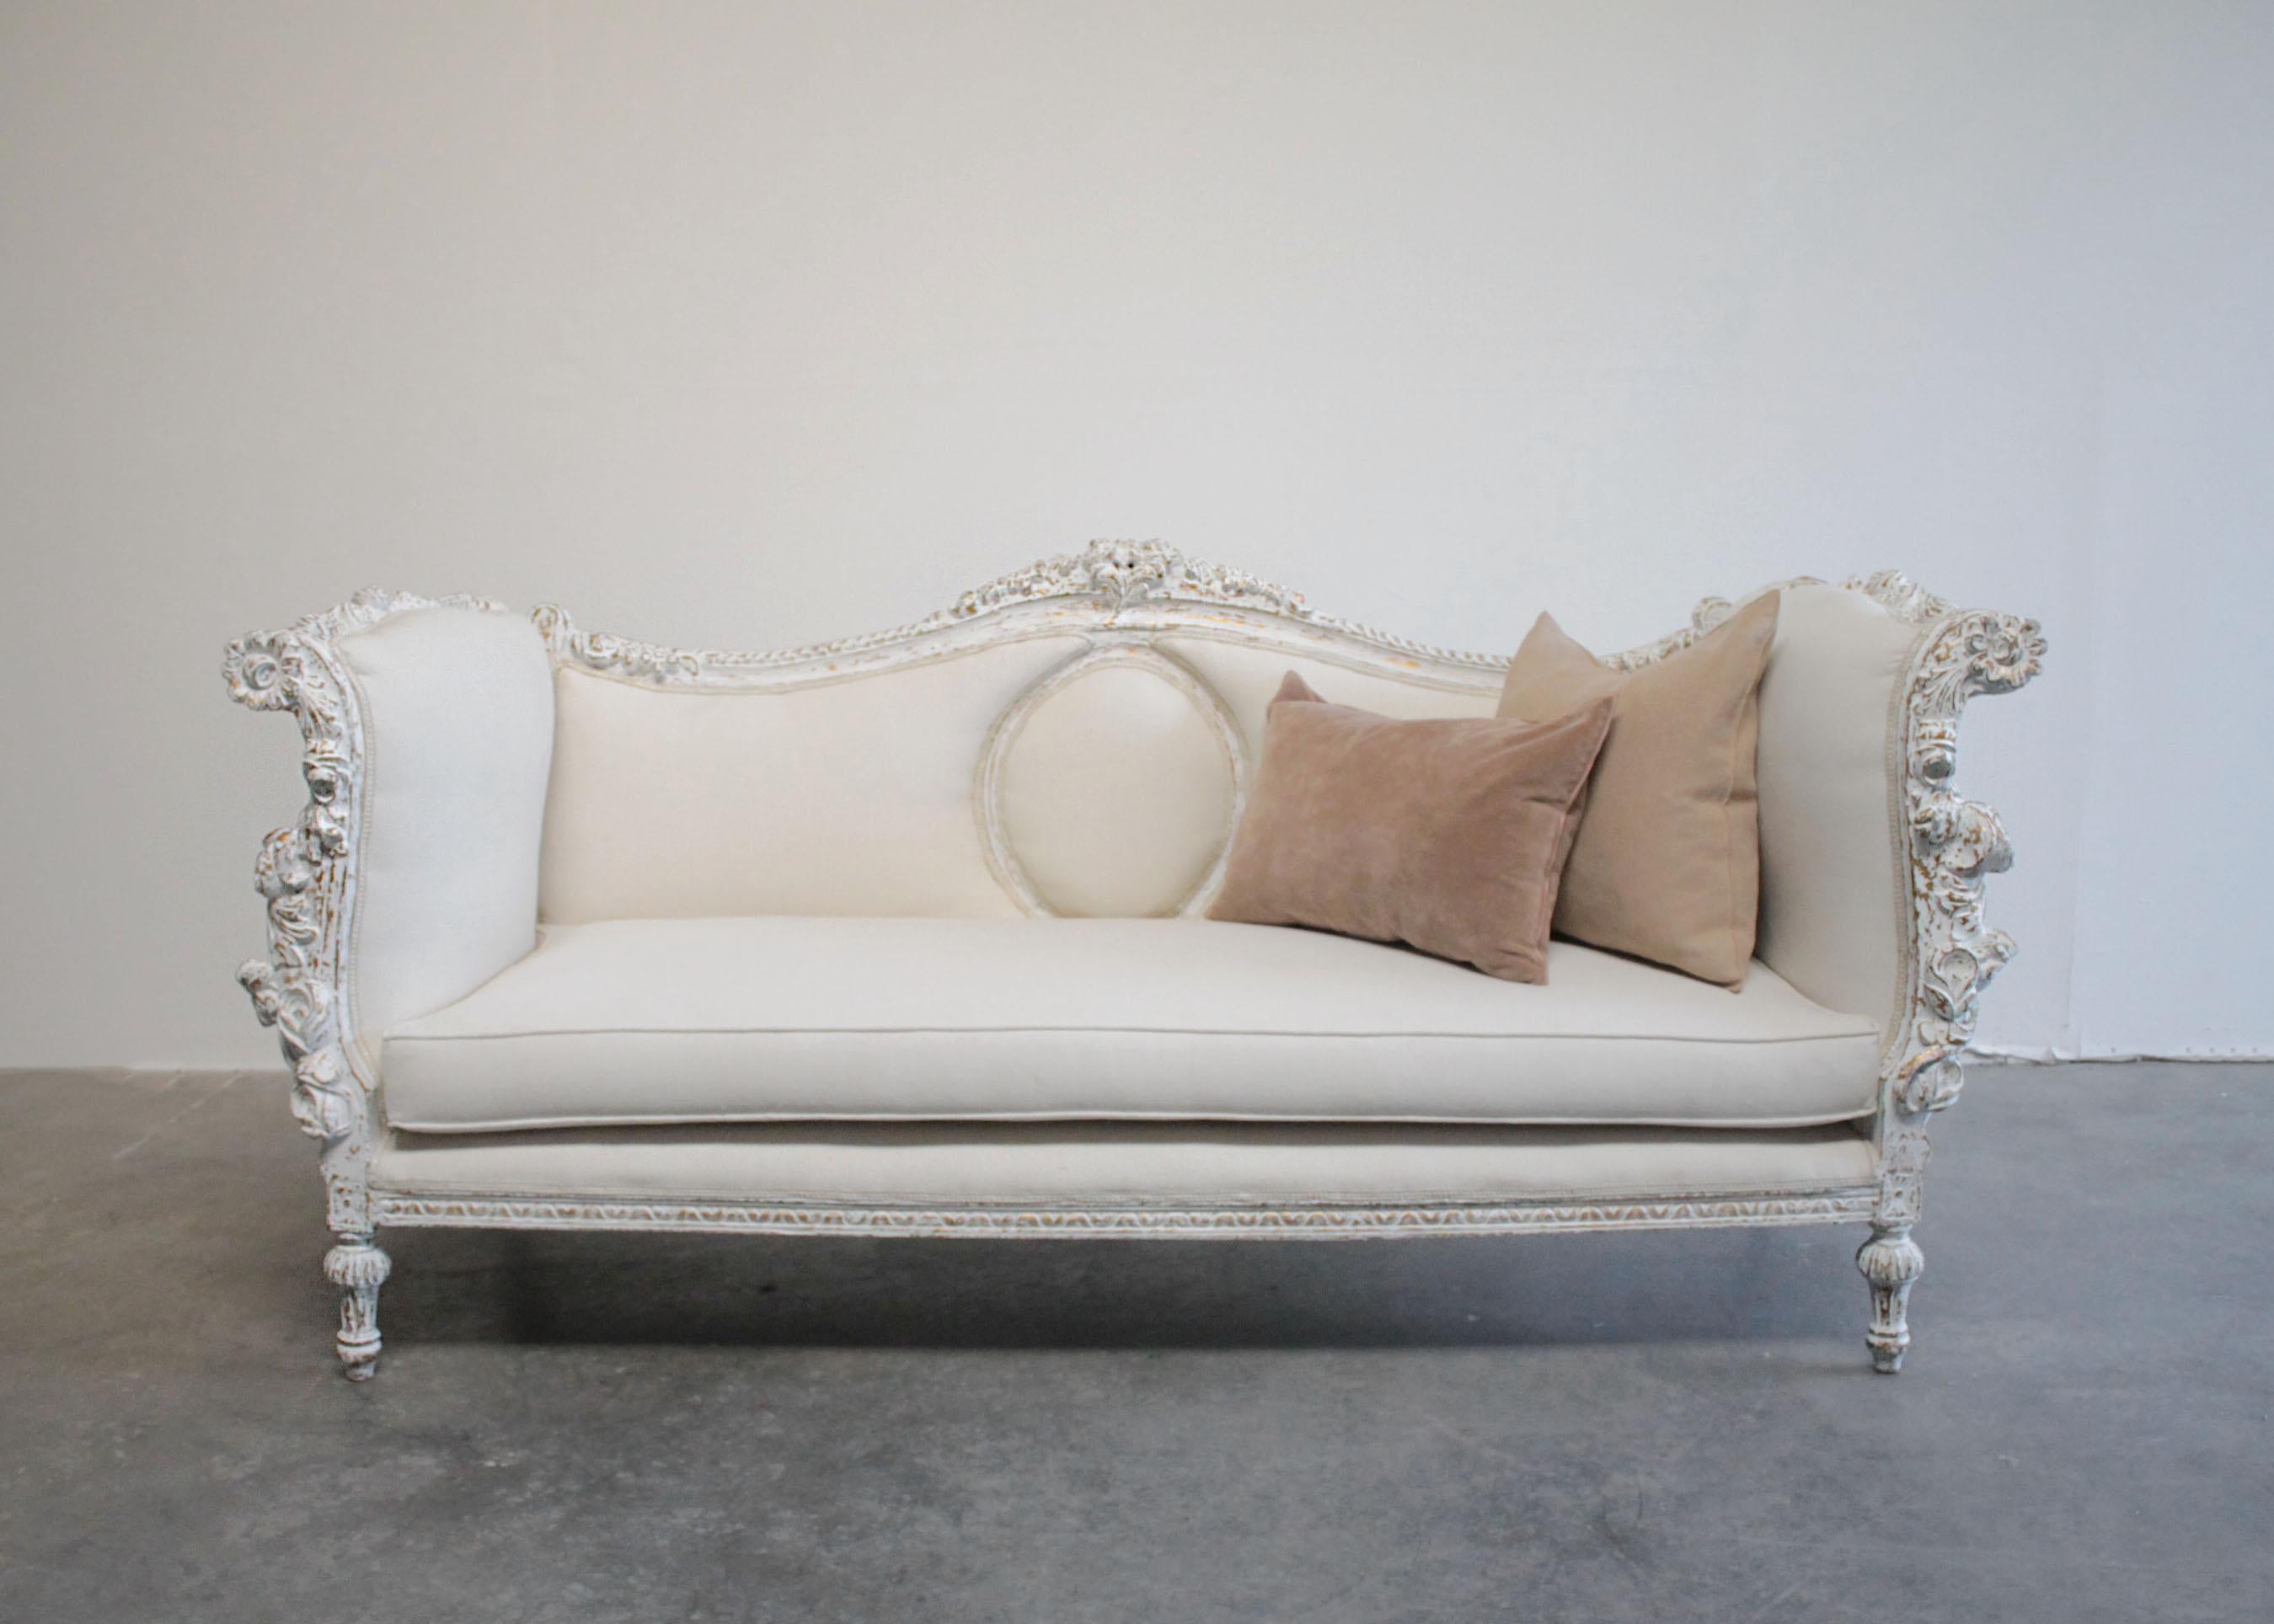 Vintage carved and painted French style sofa 
Large floral carved sofa, painted in a French antique white with distressed edges, where gilt and wood are showing through the paint.
Trailing garlands of flowers and scrolls across the back. Fluted